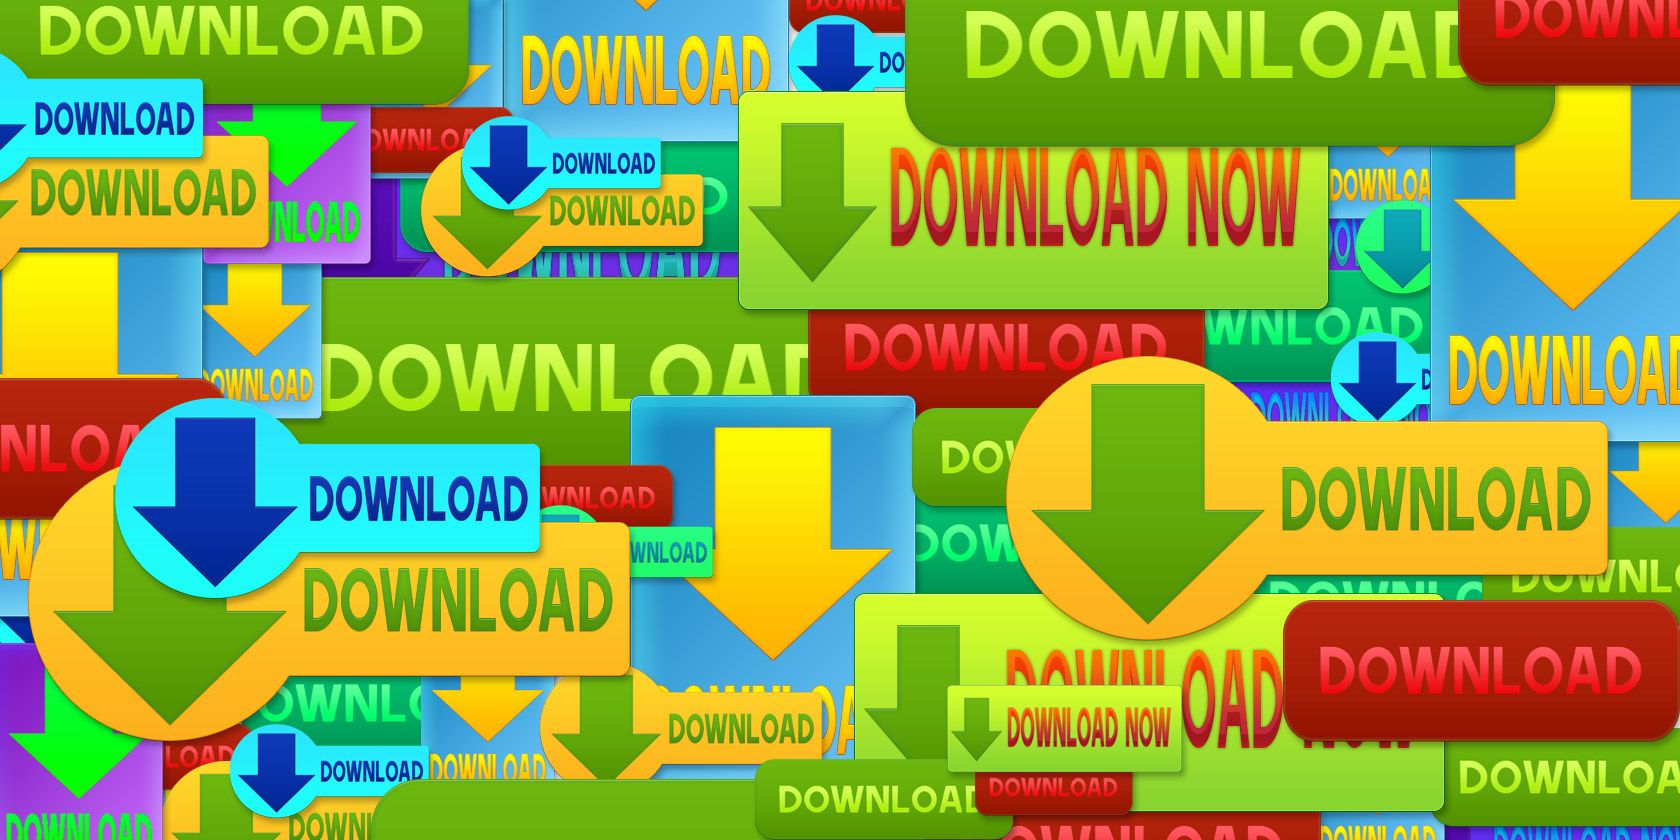 How to Avoid Fake Ads Disguised as Fake Download Links